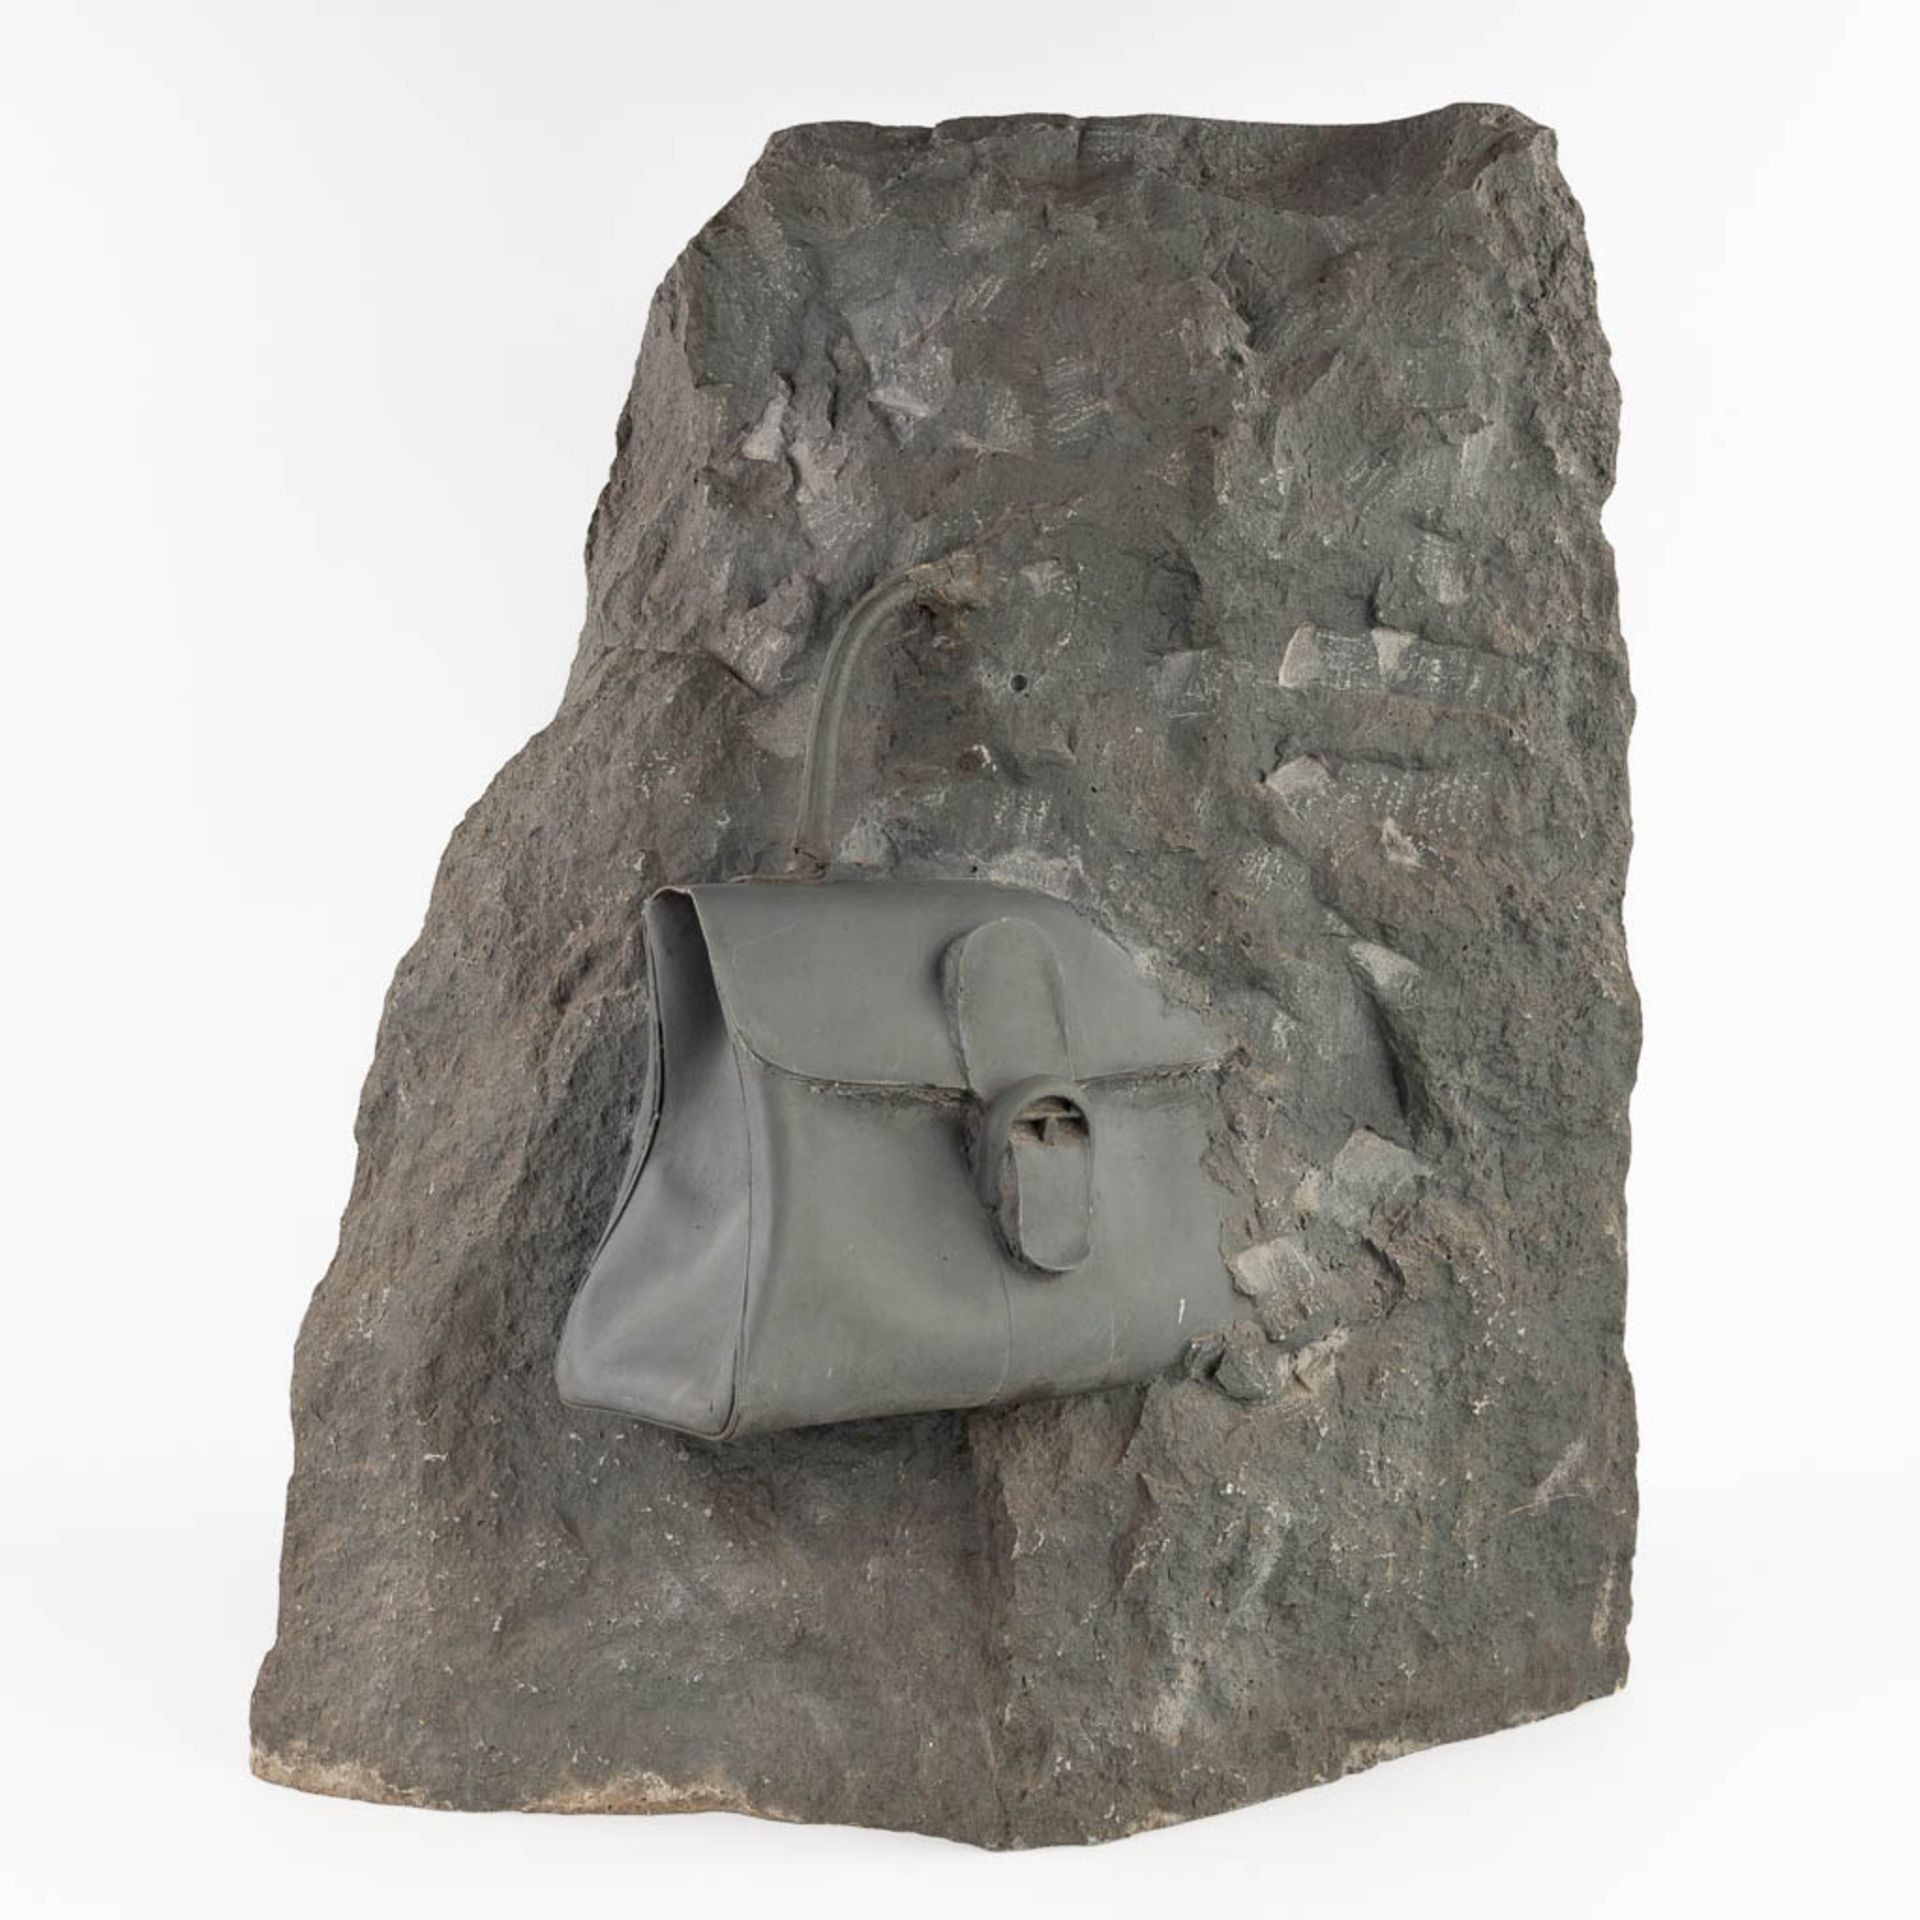 Delvaux 'Brillant' an advertising display, patinated polyester. (D:32 x W:47 x H:69 cm) - Bild 3 aus 11